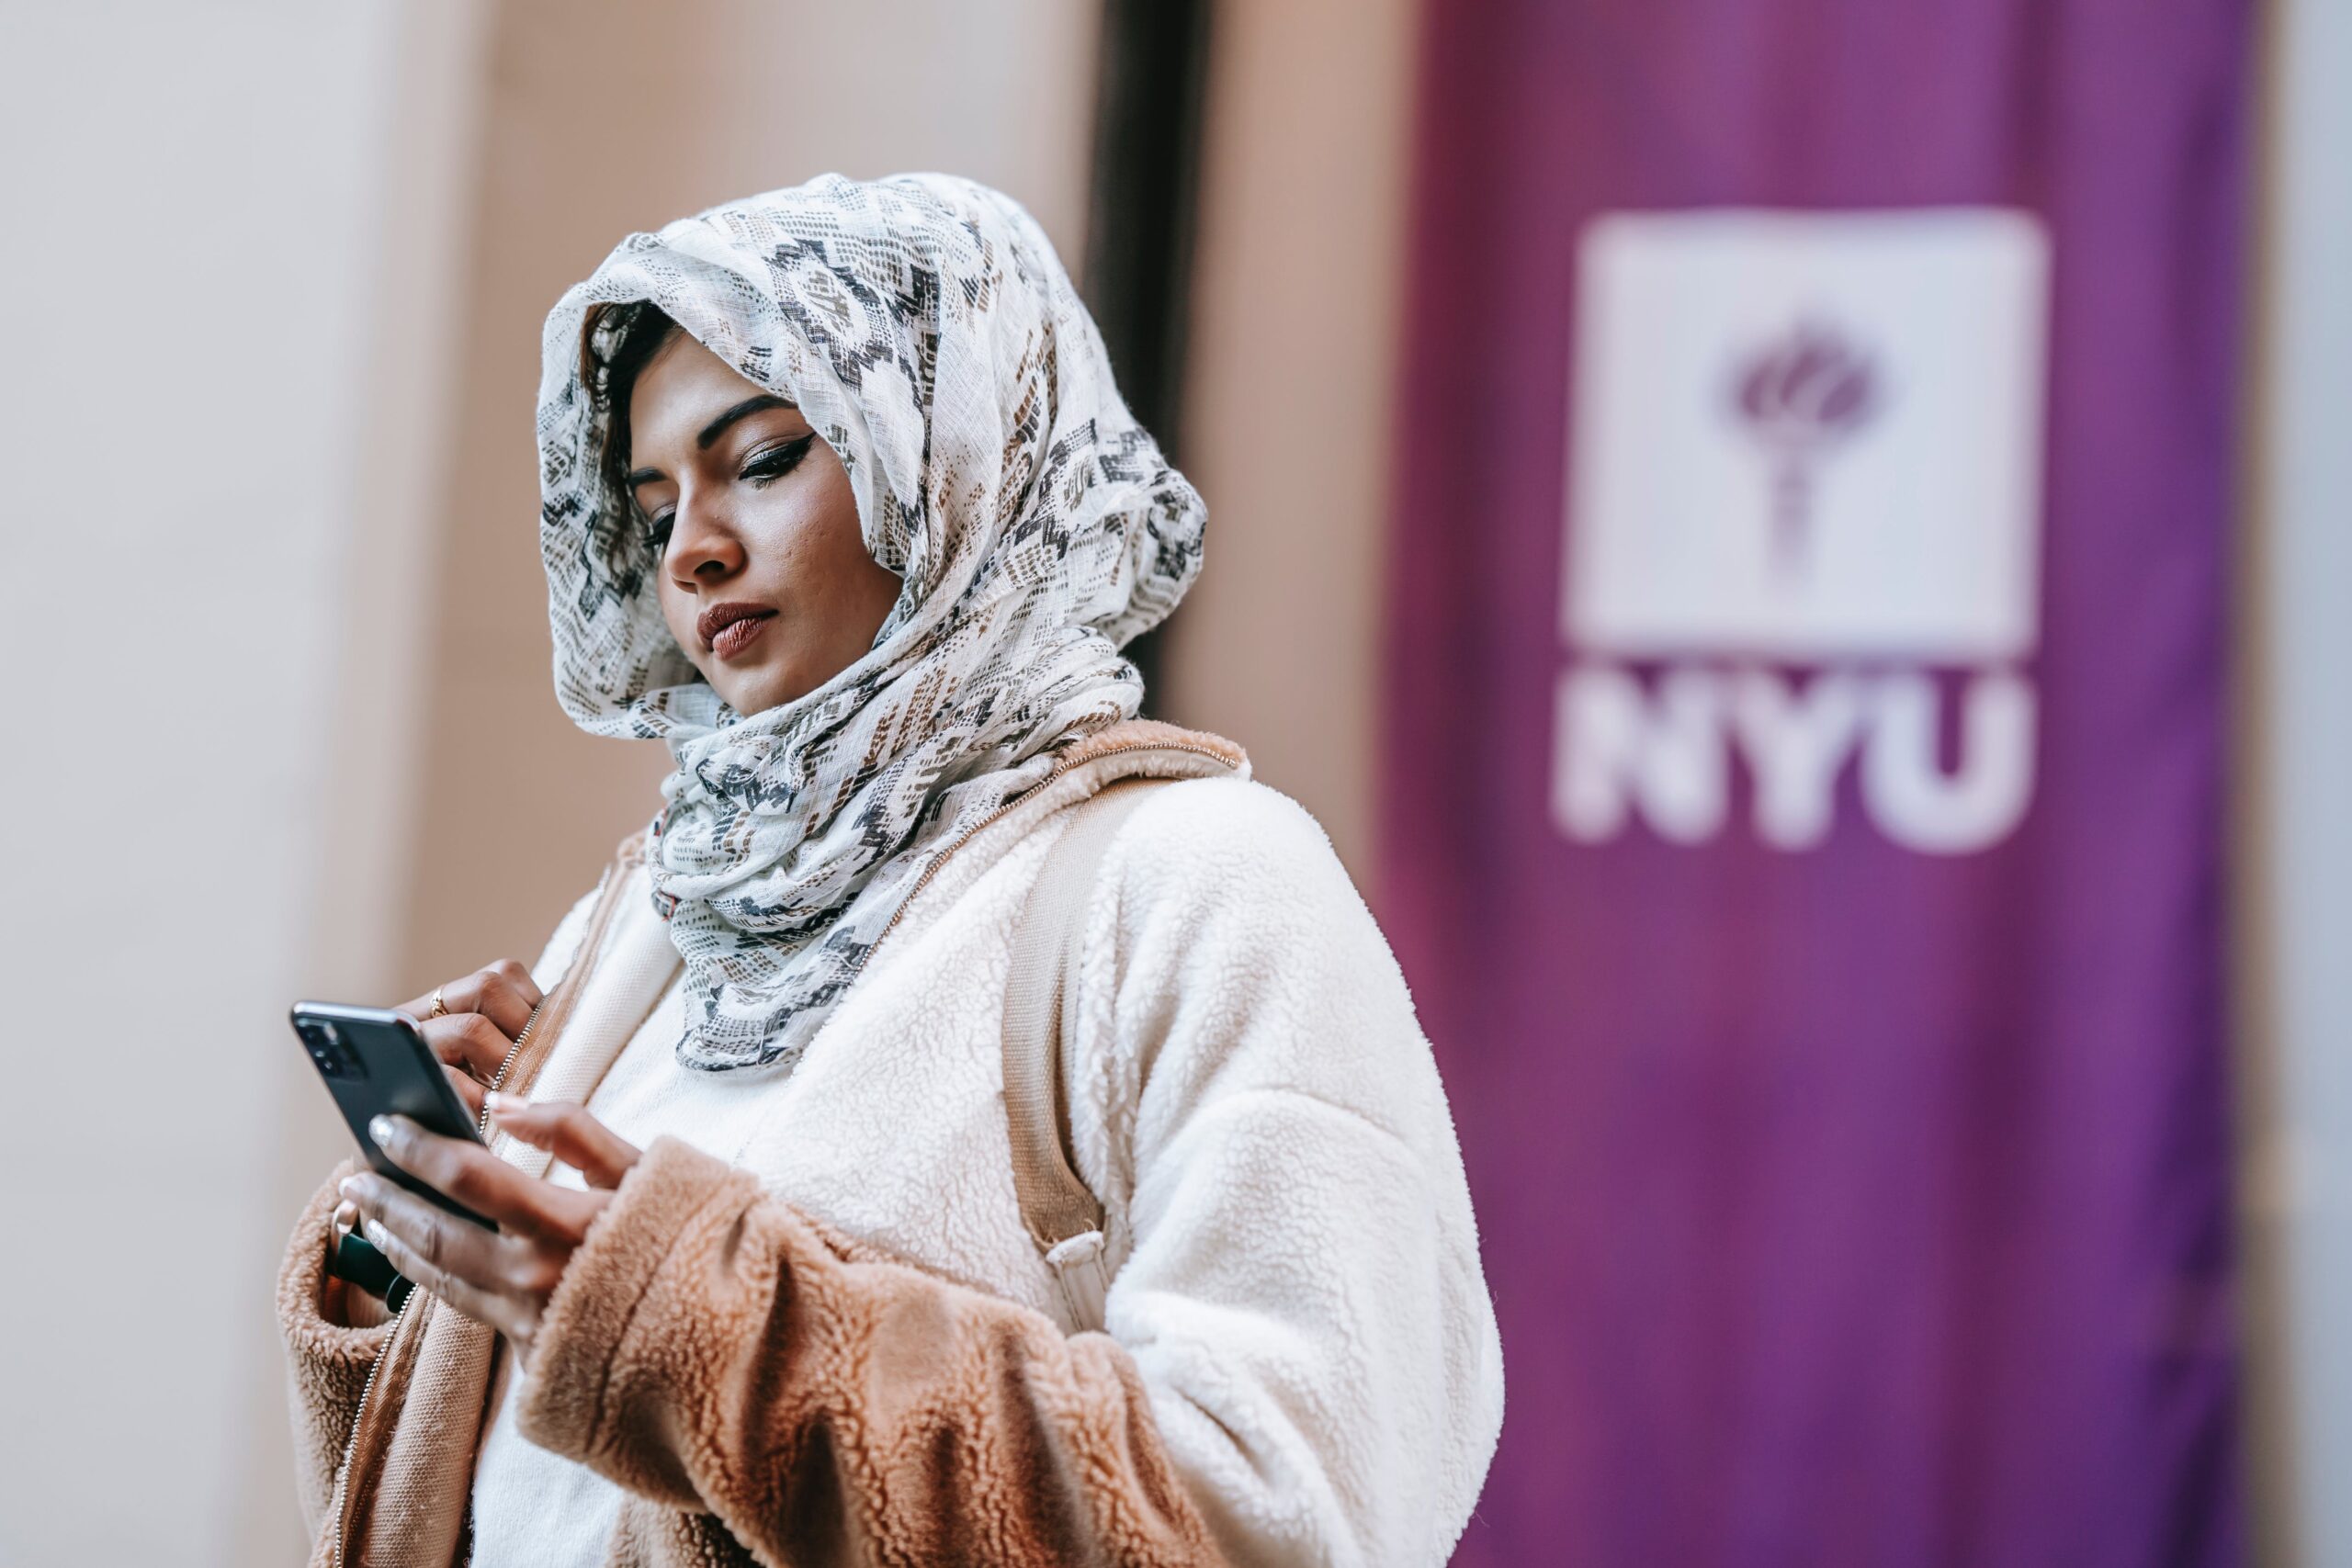 college student wearing hijab and looking at cell phone